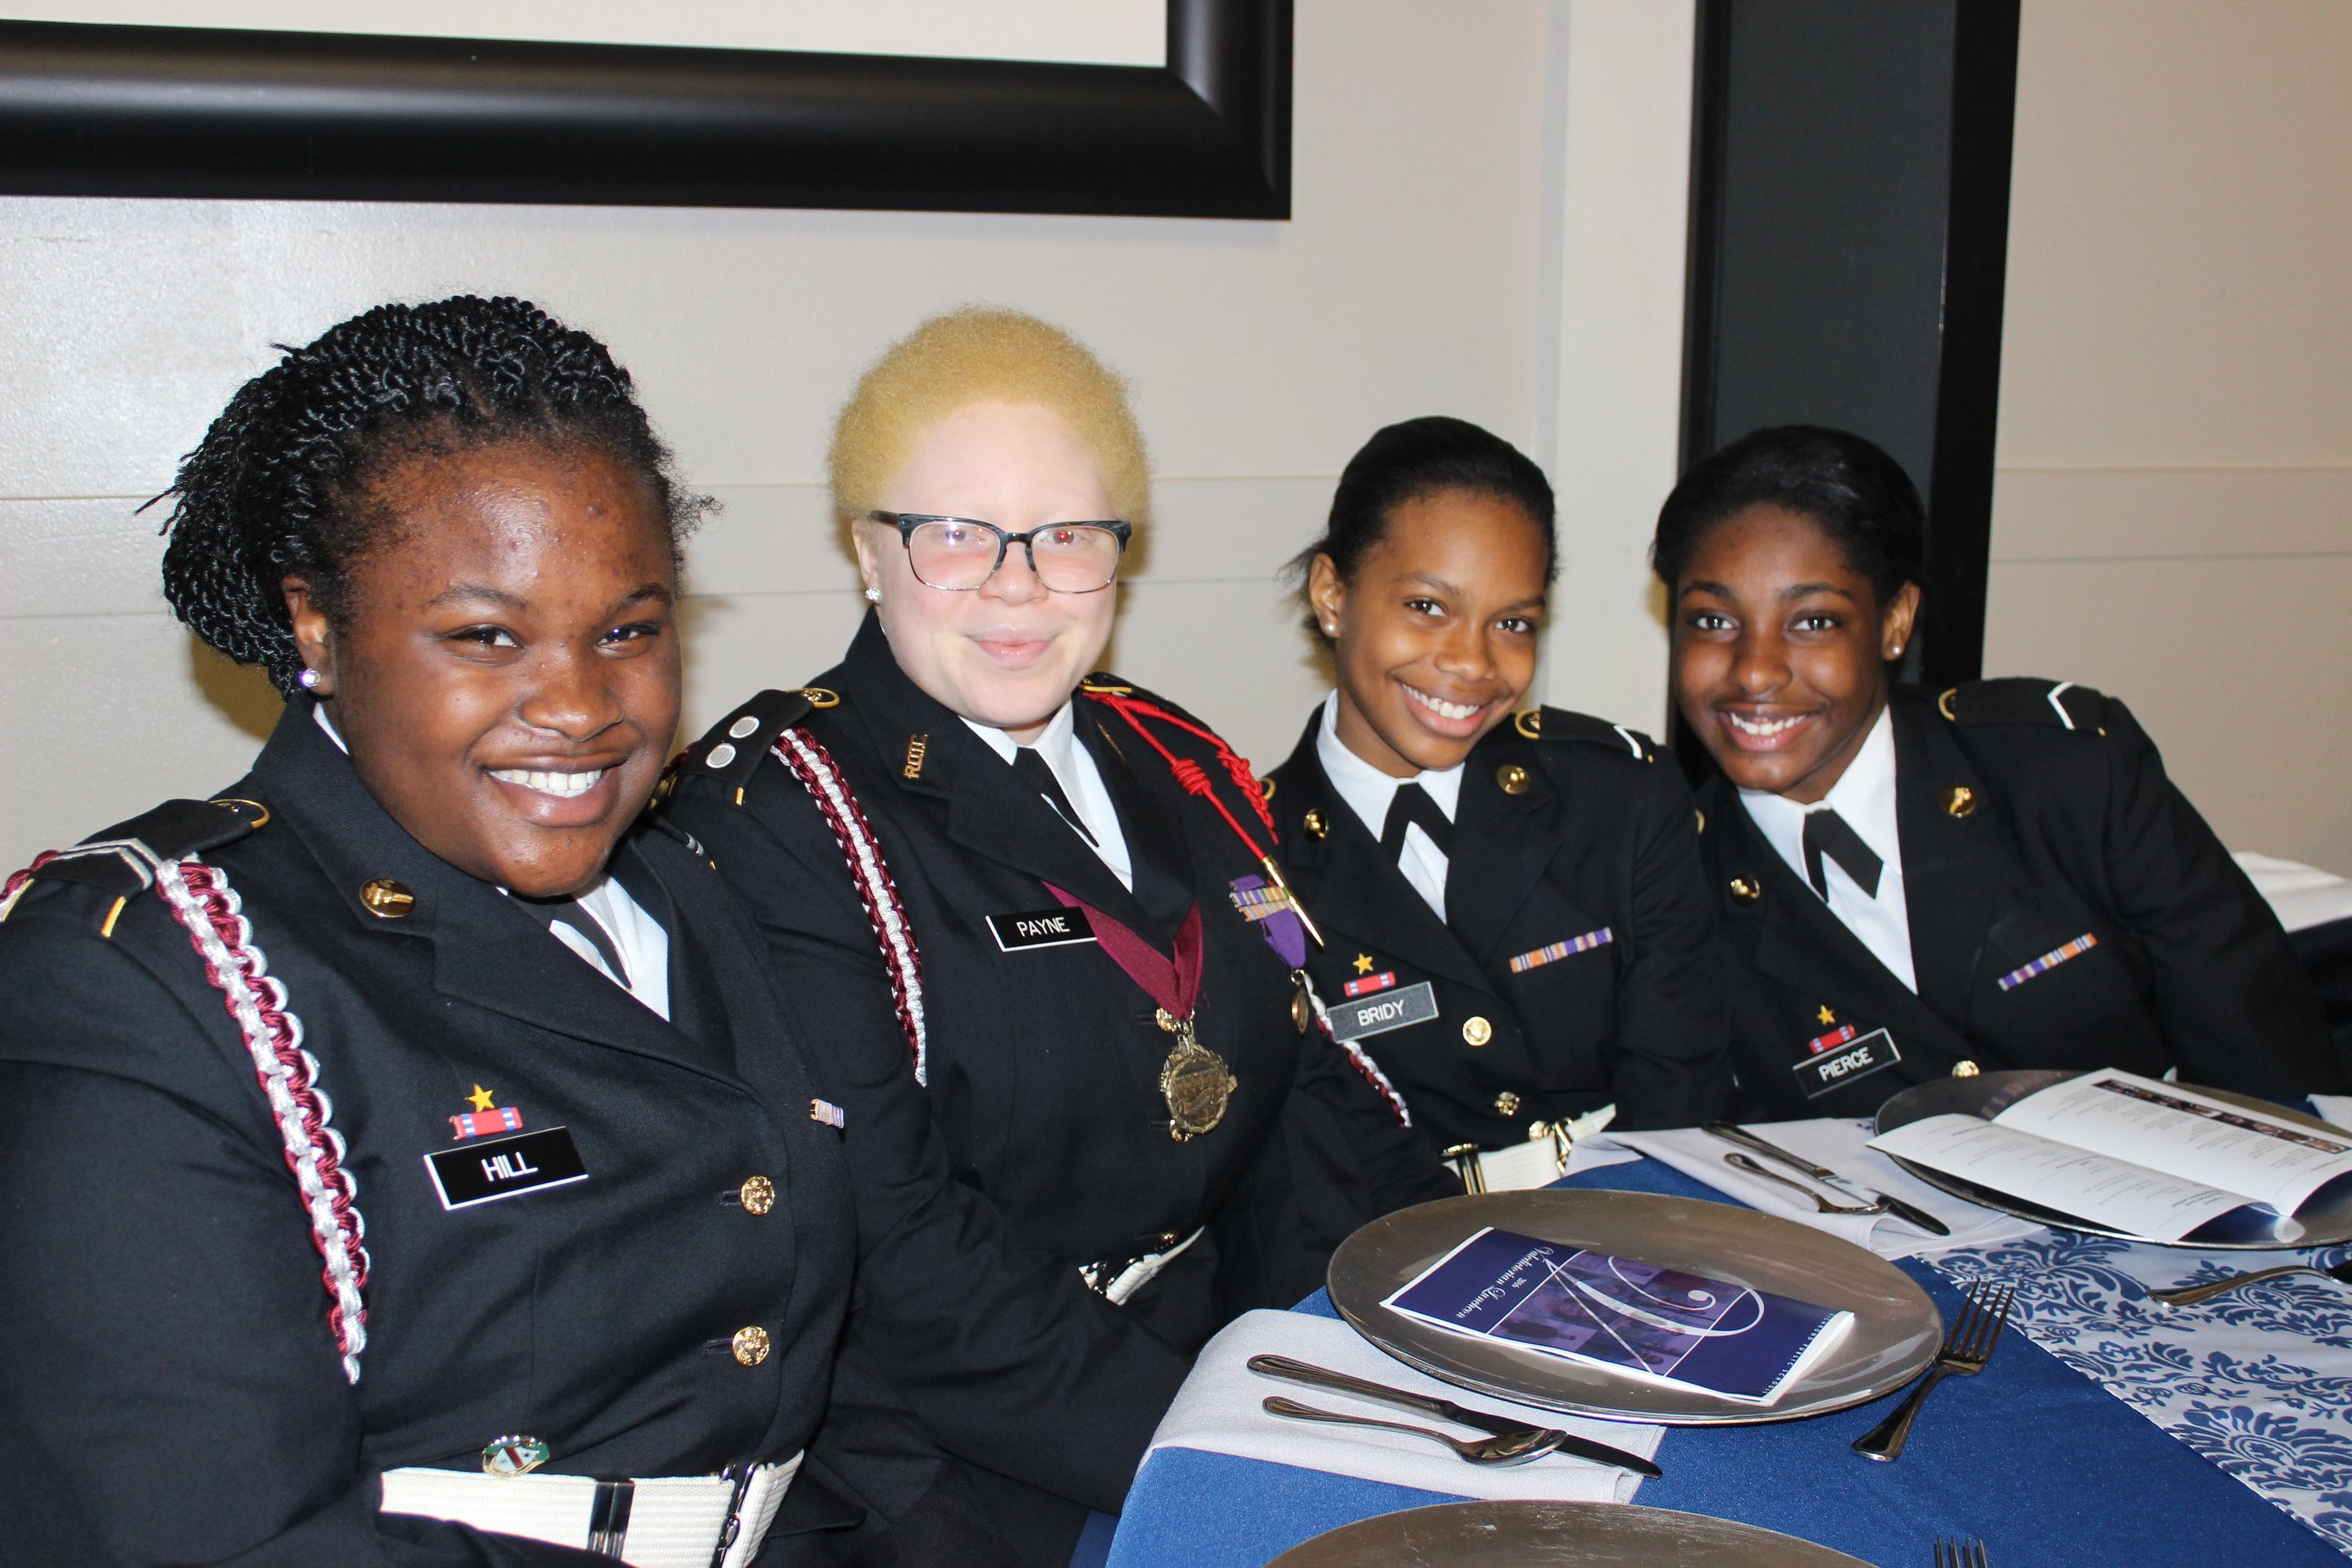 Richmond Public Schools On Twitter Entertainment For The 2016 Valedictorian Luncheon Was Provided By The Awesome Franklin Military Academy Httpstco9gee4s8r3j Twitter